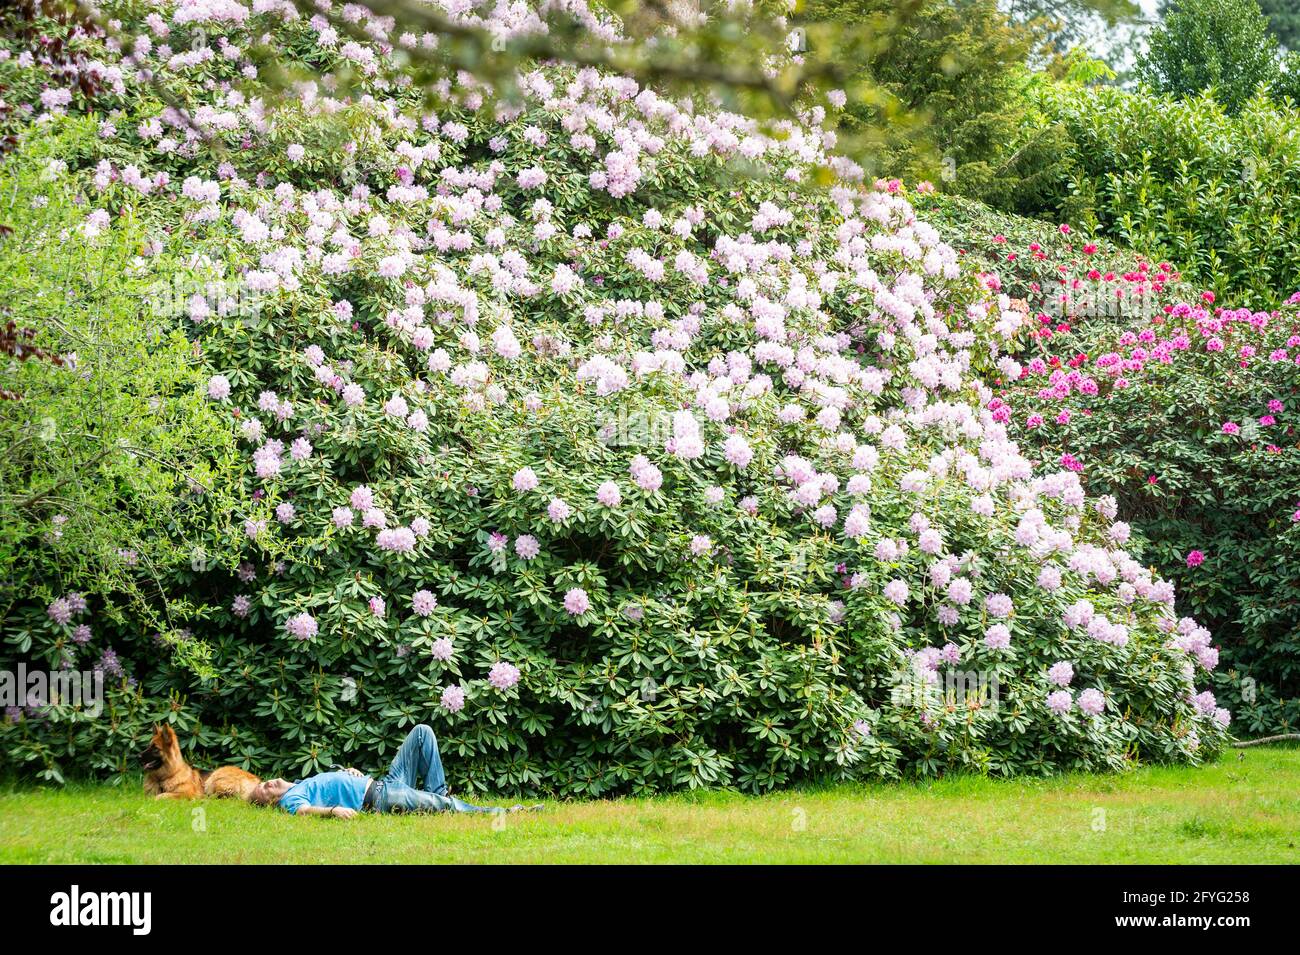 Iver, UK.  28 May 2021. UK Weather: A man sunbathing amongst the rhododendrons and azalea, currently in bloom, in the Temple Gardens at Langley Park in Iver, Buckinghamshire ahead of the Bank Holiday weekend, when temperatures are expected to rise above 20C.  Langley Park is a former royal hunting ground with links back to King Henry VIII, Queen Elizabeth I and Queen Victoria.   Credit: Stephen Chung / Alamy Live News Stock Photo